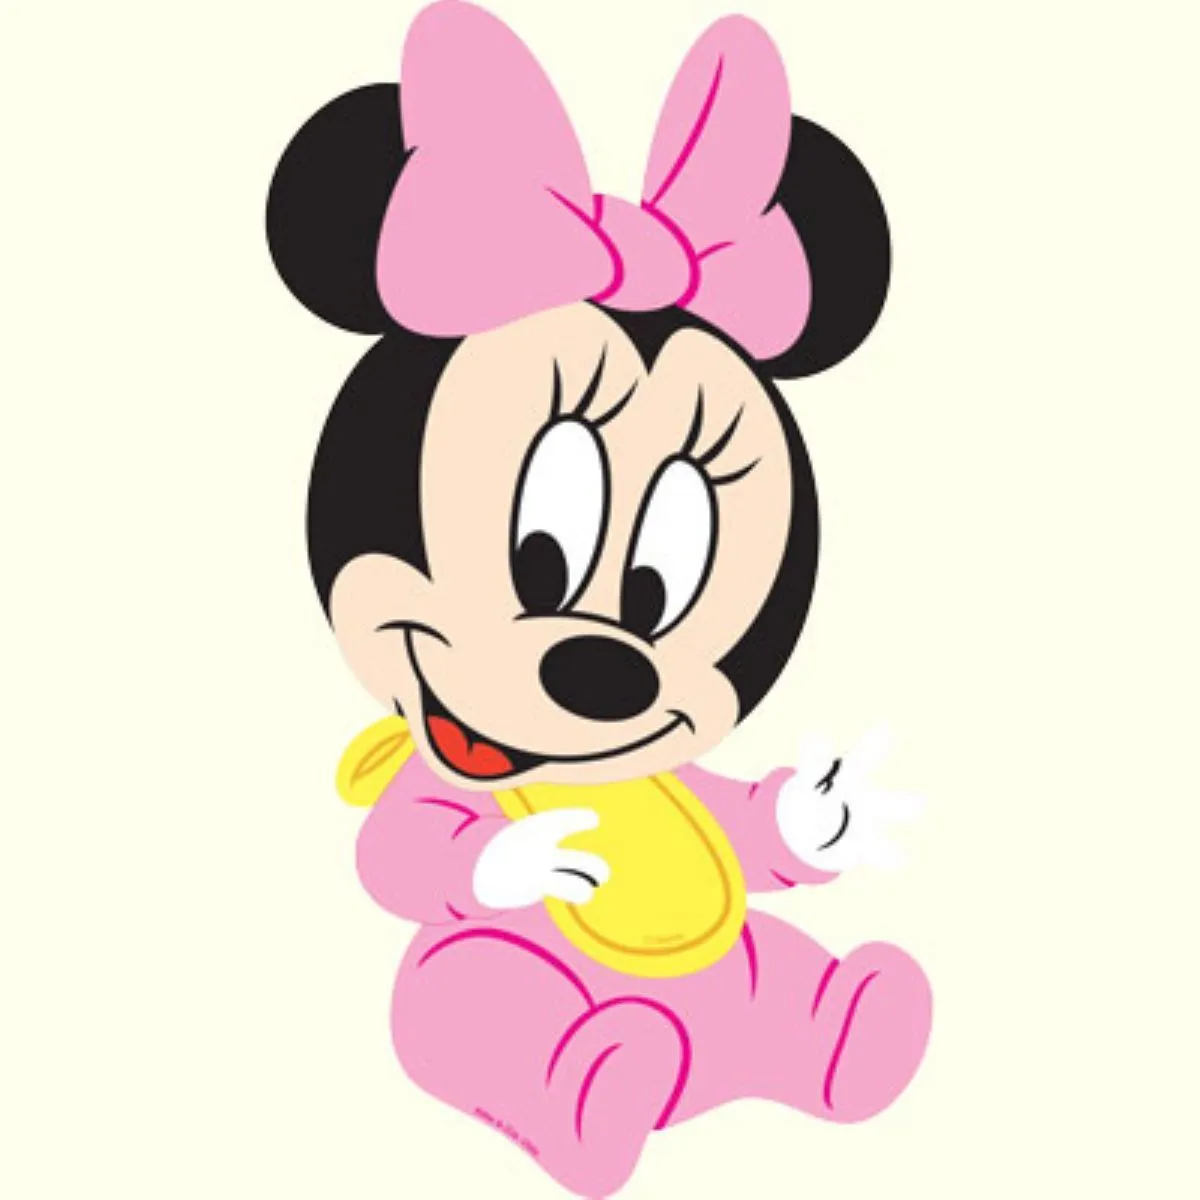 Baby Minnie Mouse Png | Clipart Panda - Free Clipart Images | Mimi ...